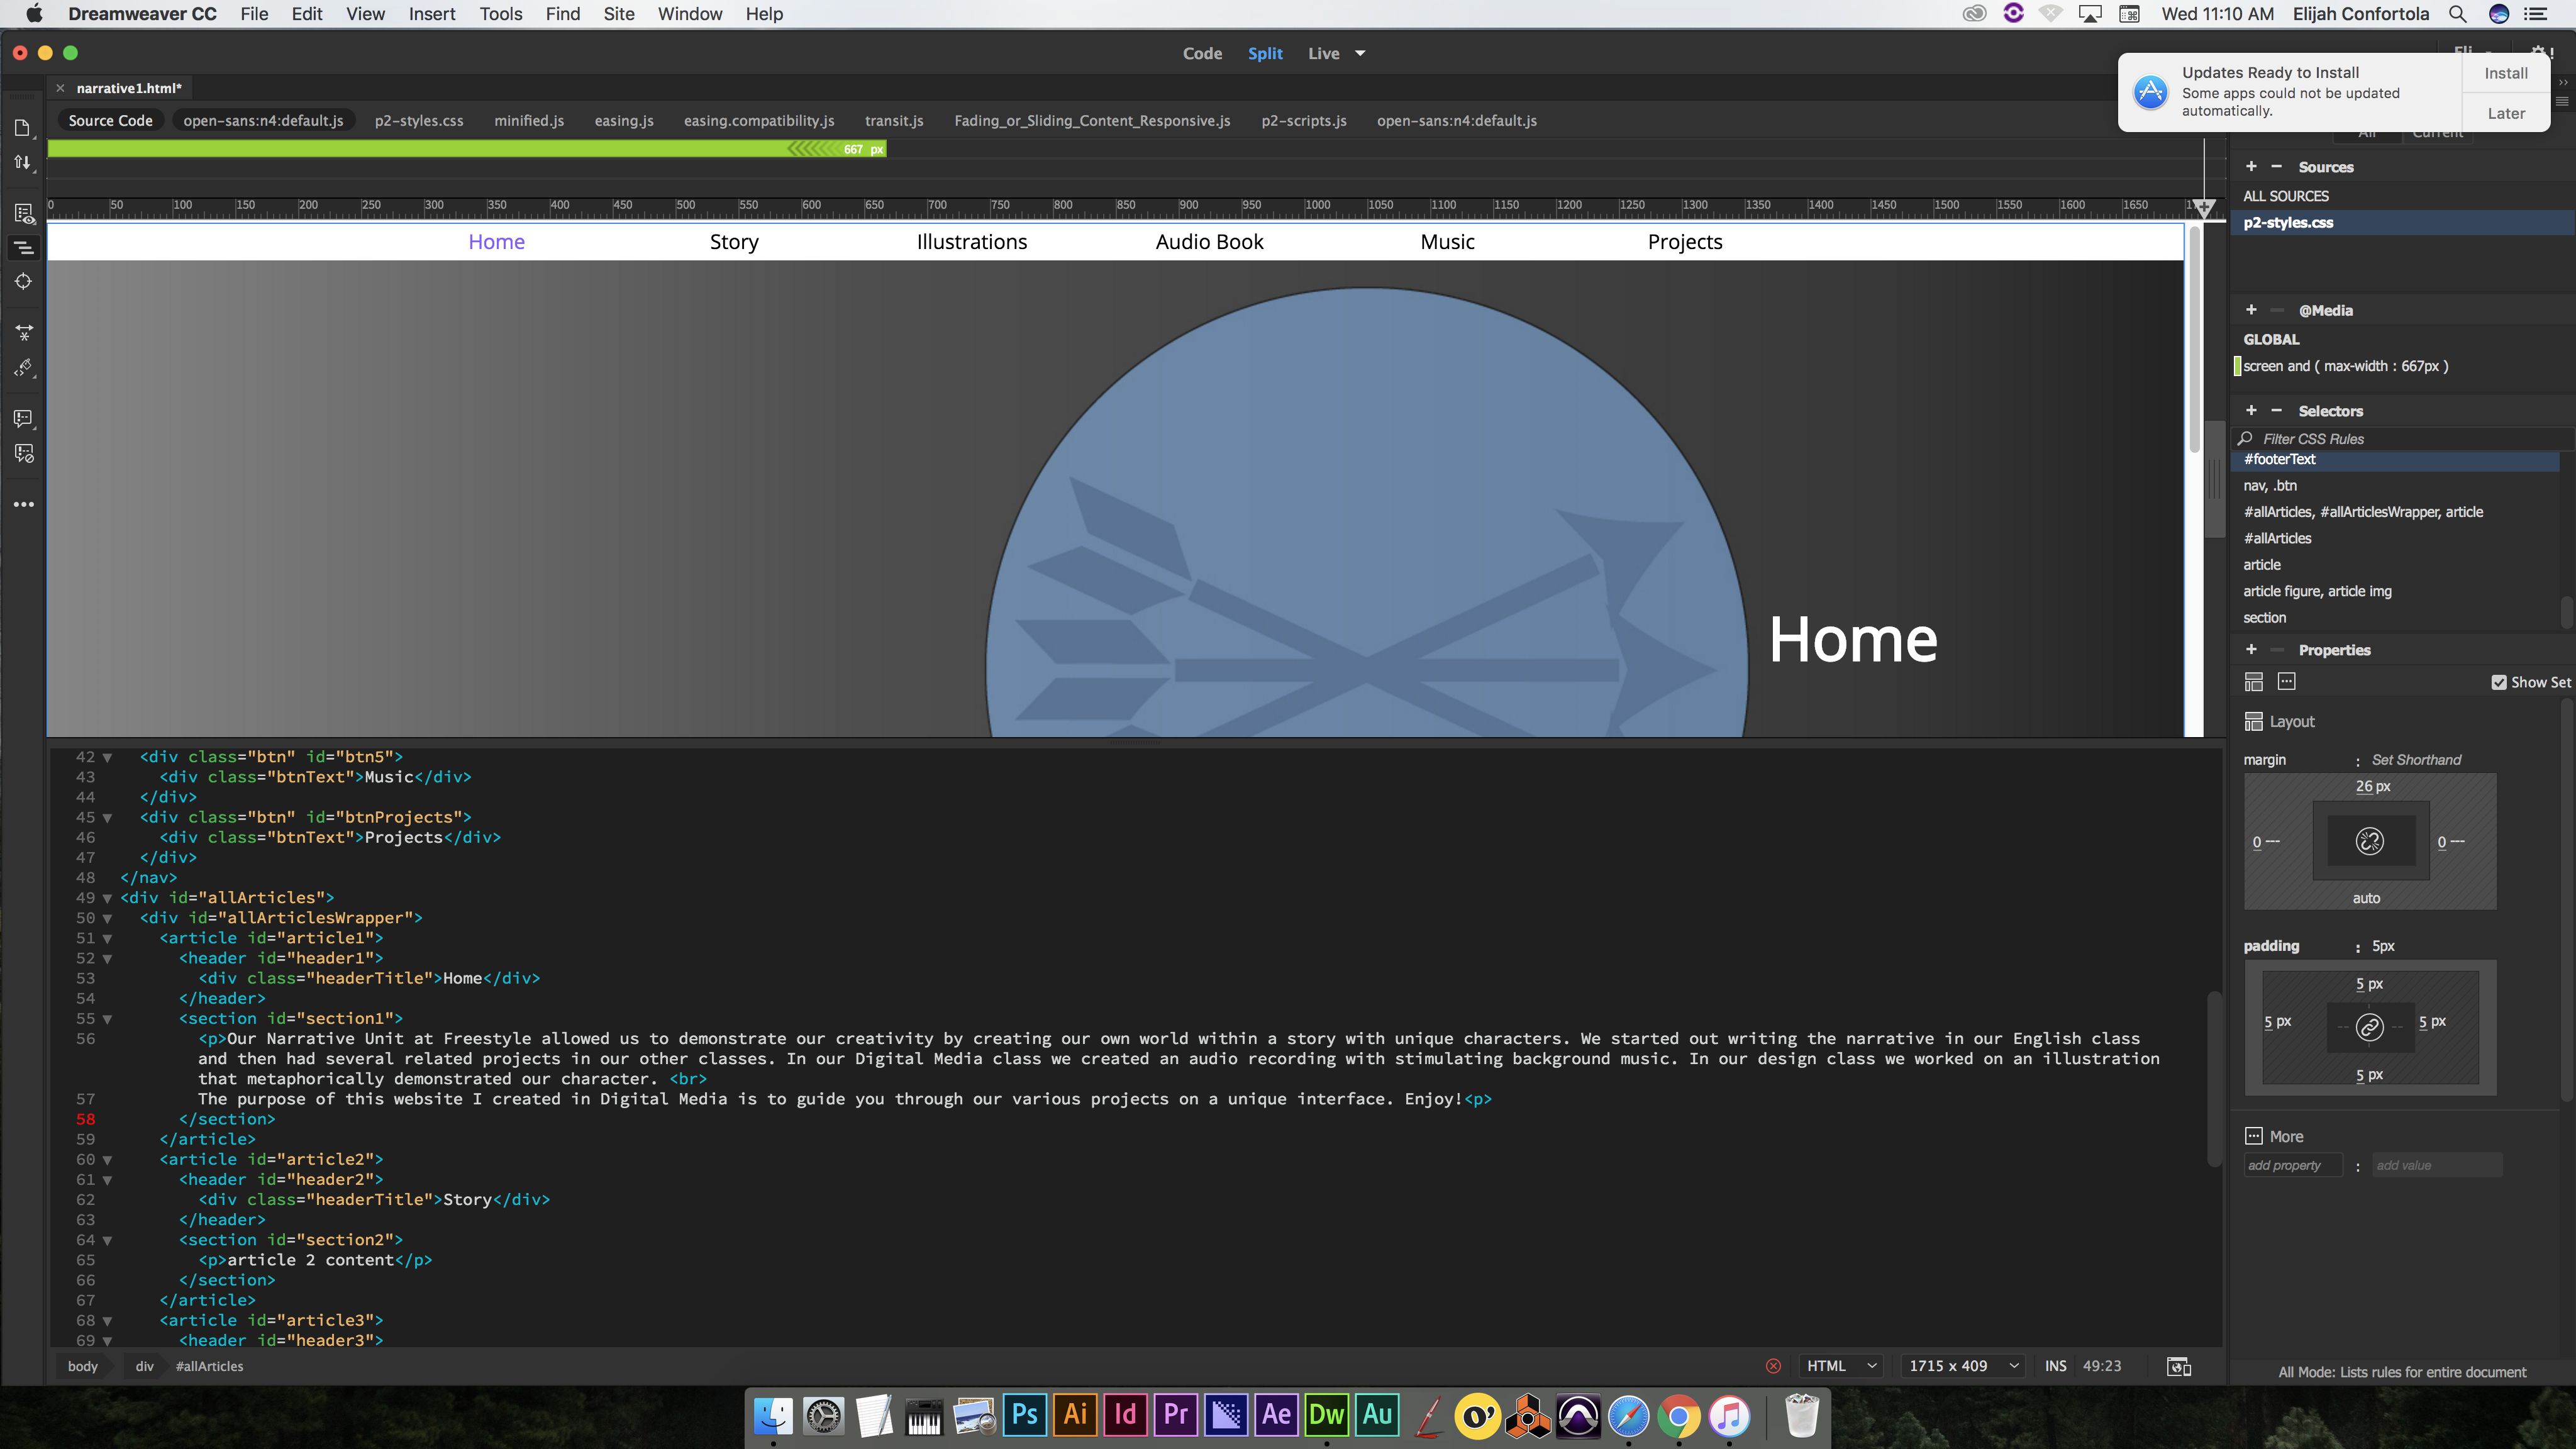 This is a screenshot of my page in Dreamweaver. Dreamweaver is the application I used to code my website.